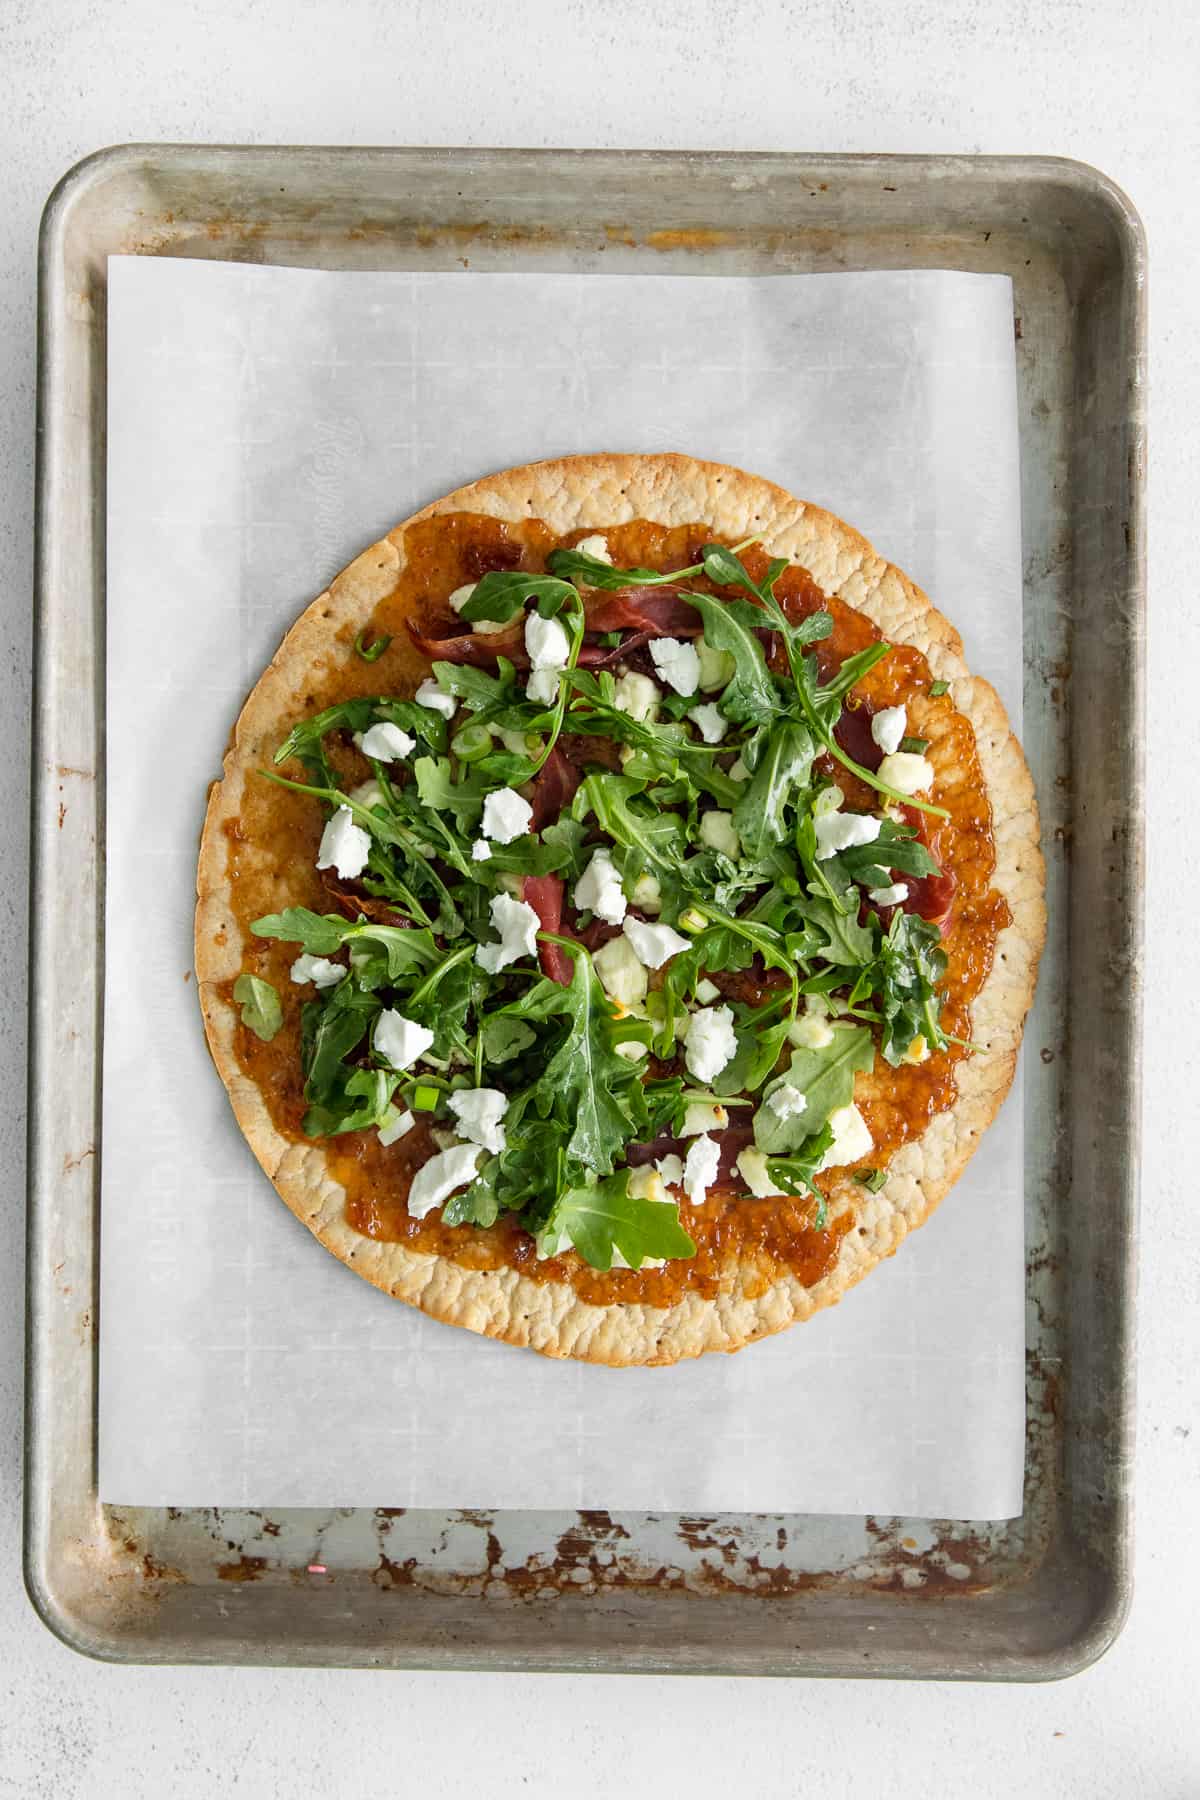 Fit and goat cheese flatbread topped with arugula on a plate.